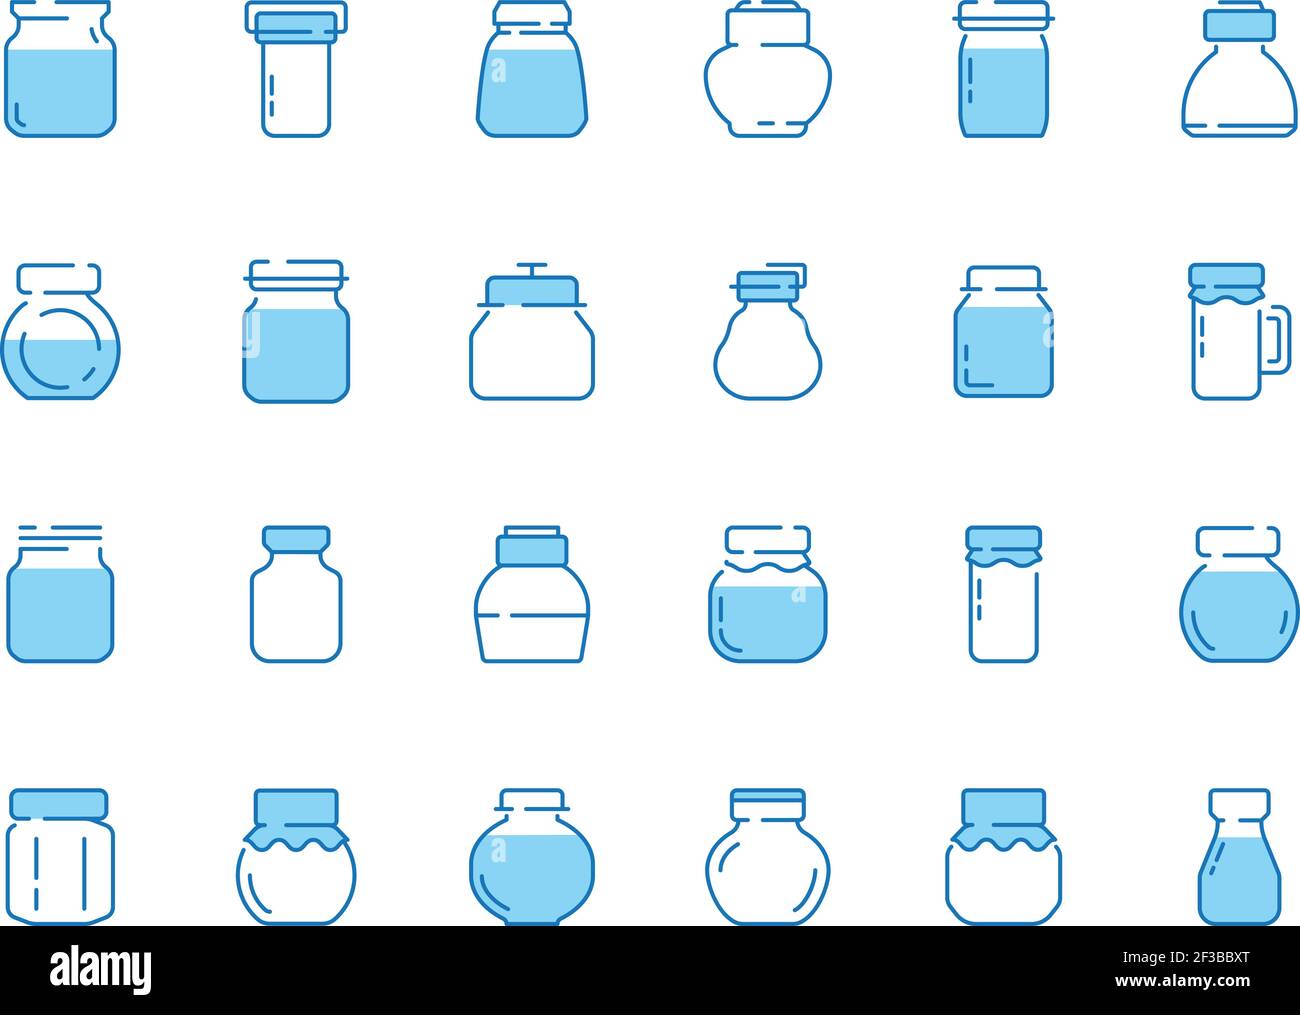 Jar line icons. Bottles for sweets jam marmalade strawberry with labels vector symbols collection Stock Vector